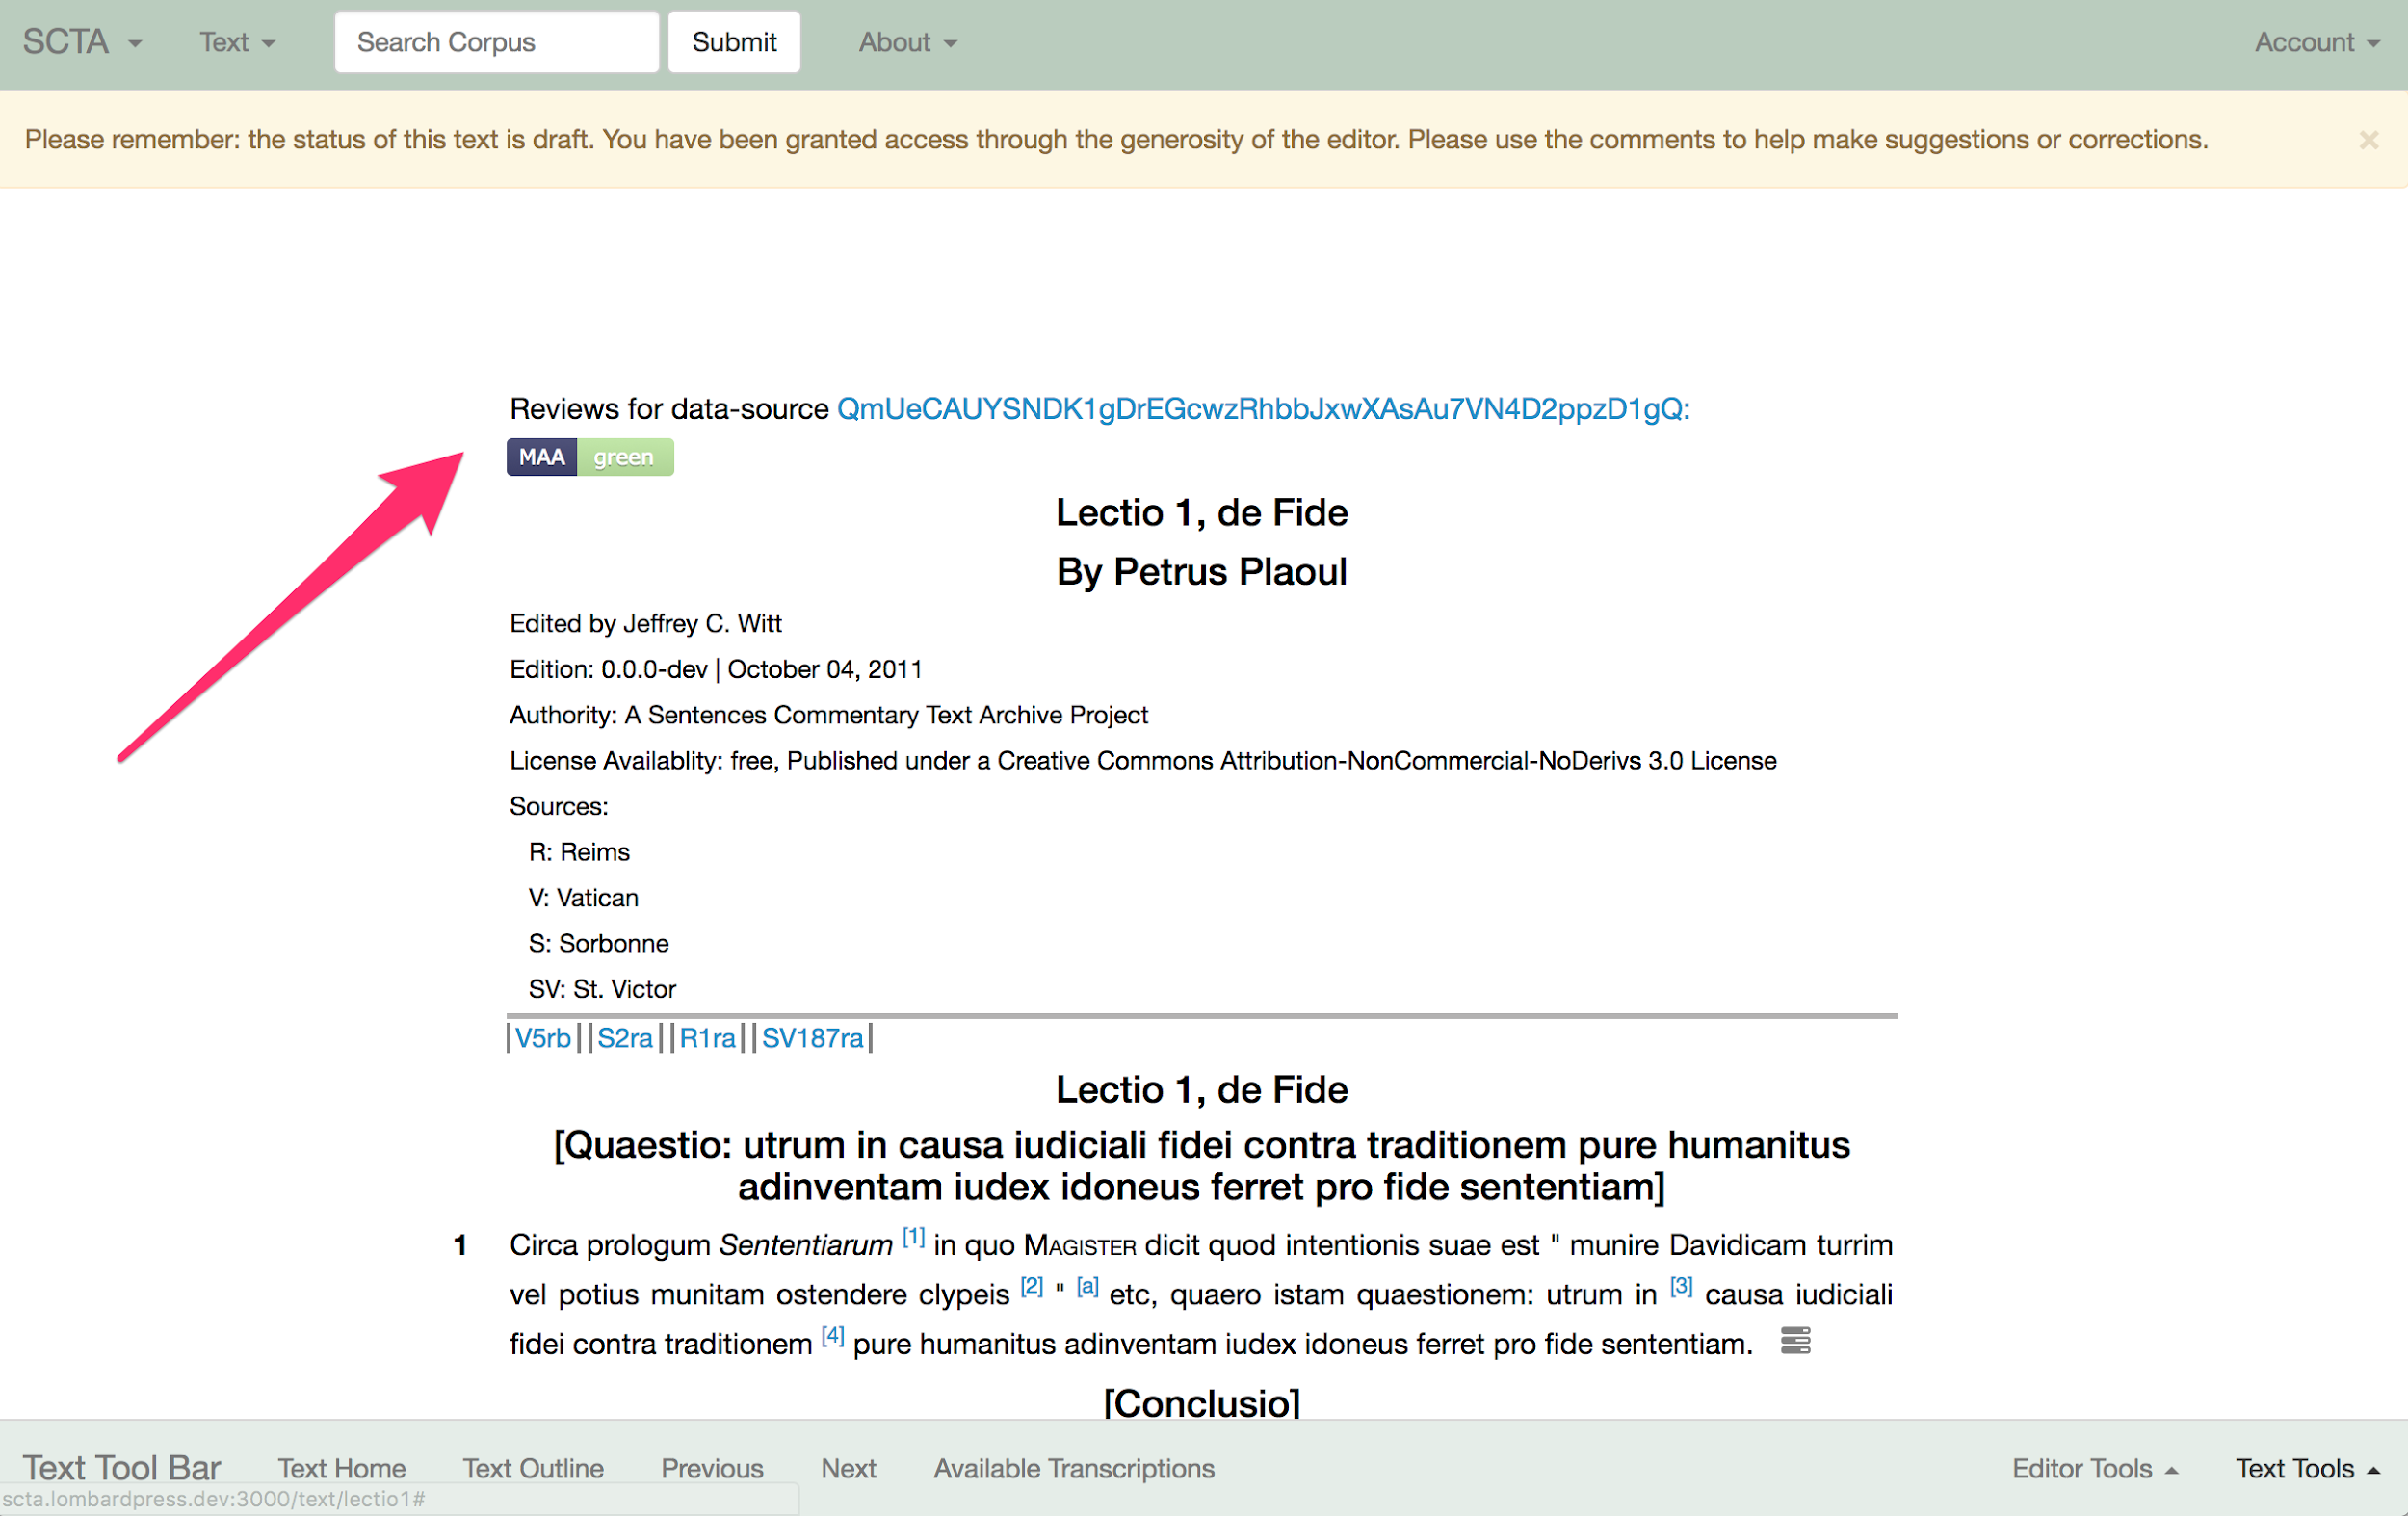 LombardPress-Web's implementation of the DLL Review Registry
                            Service.